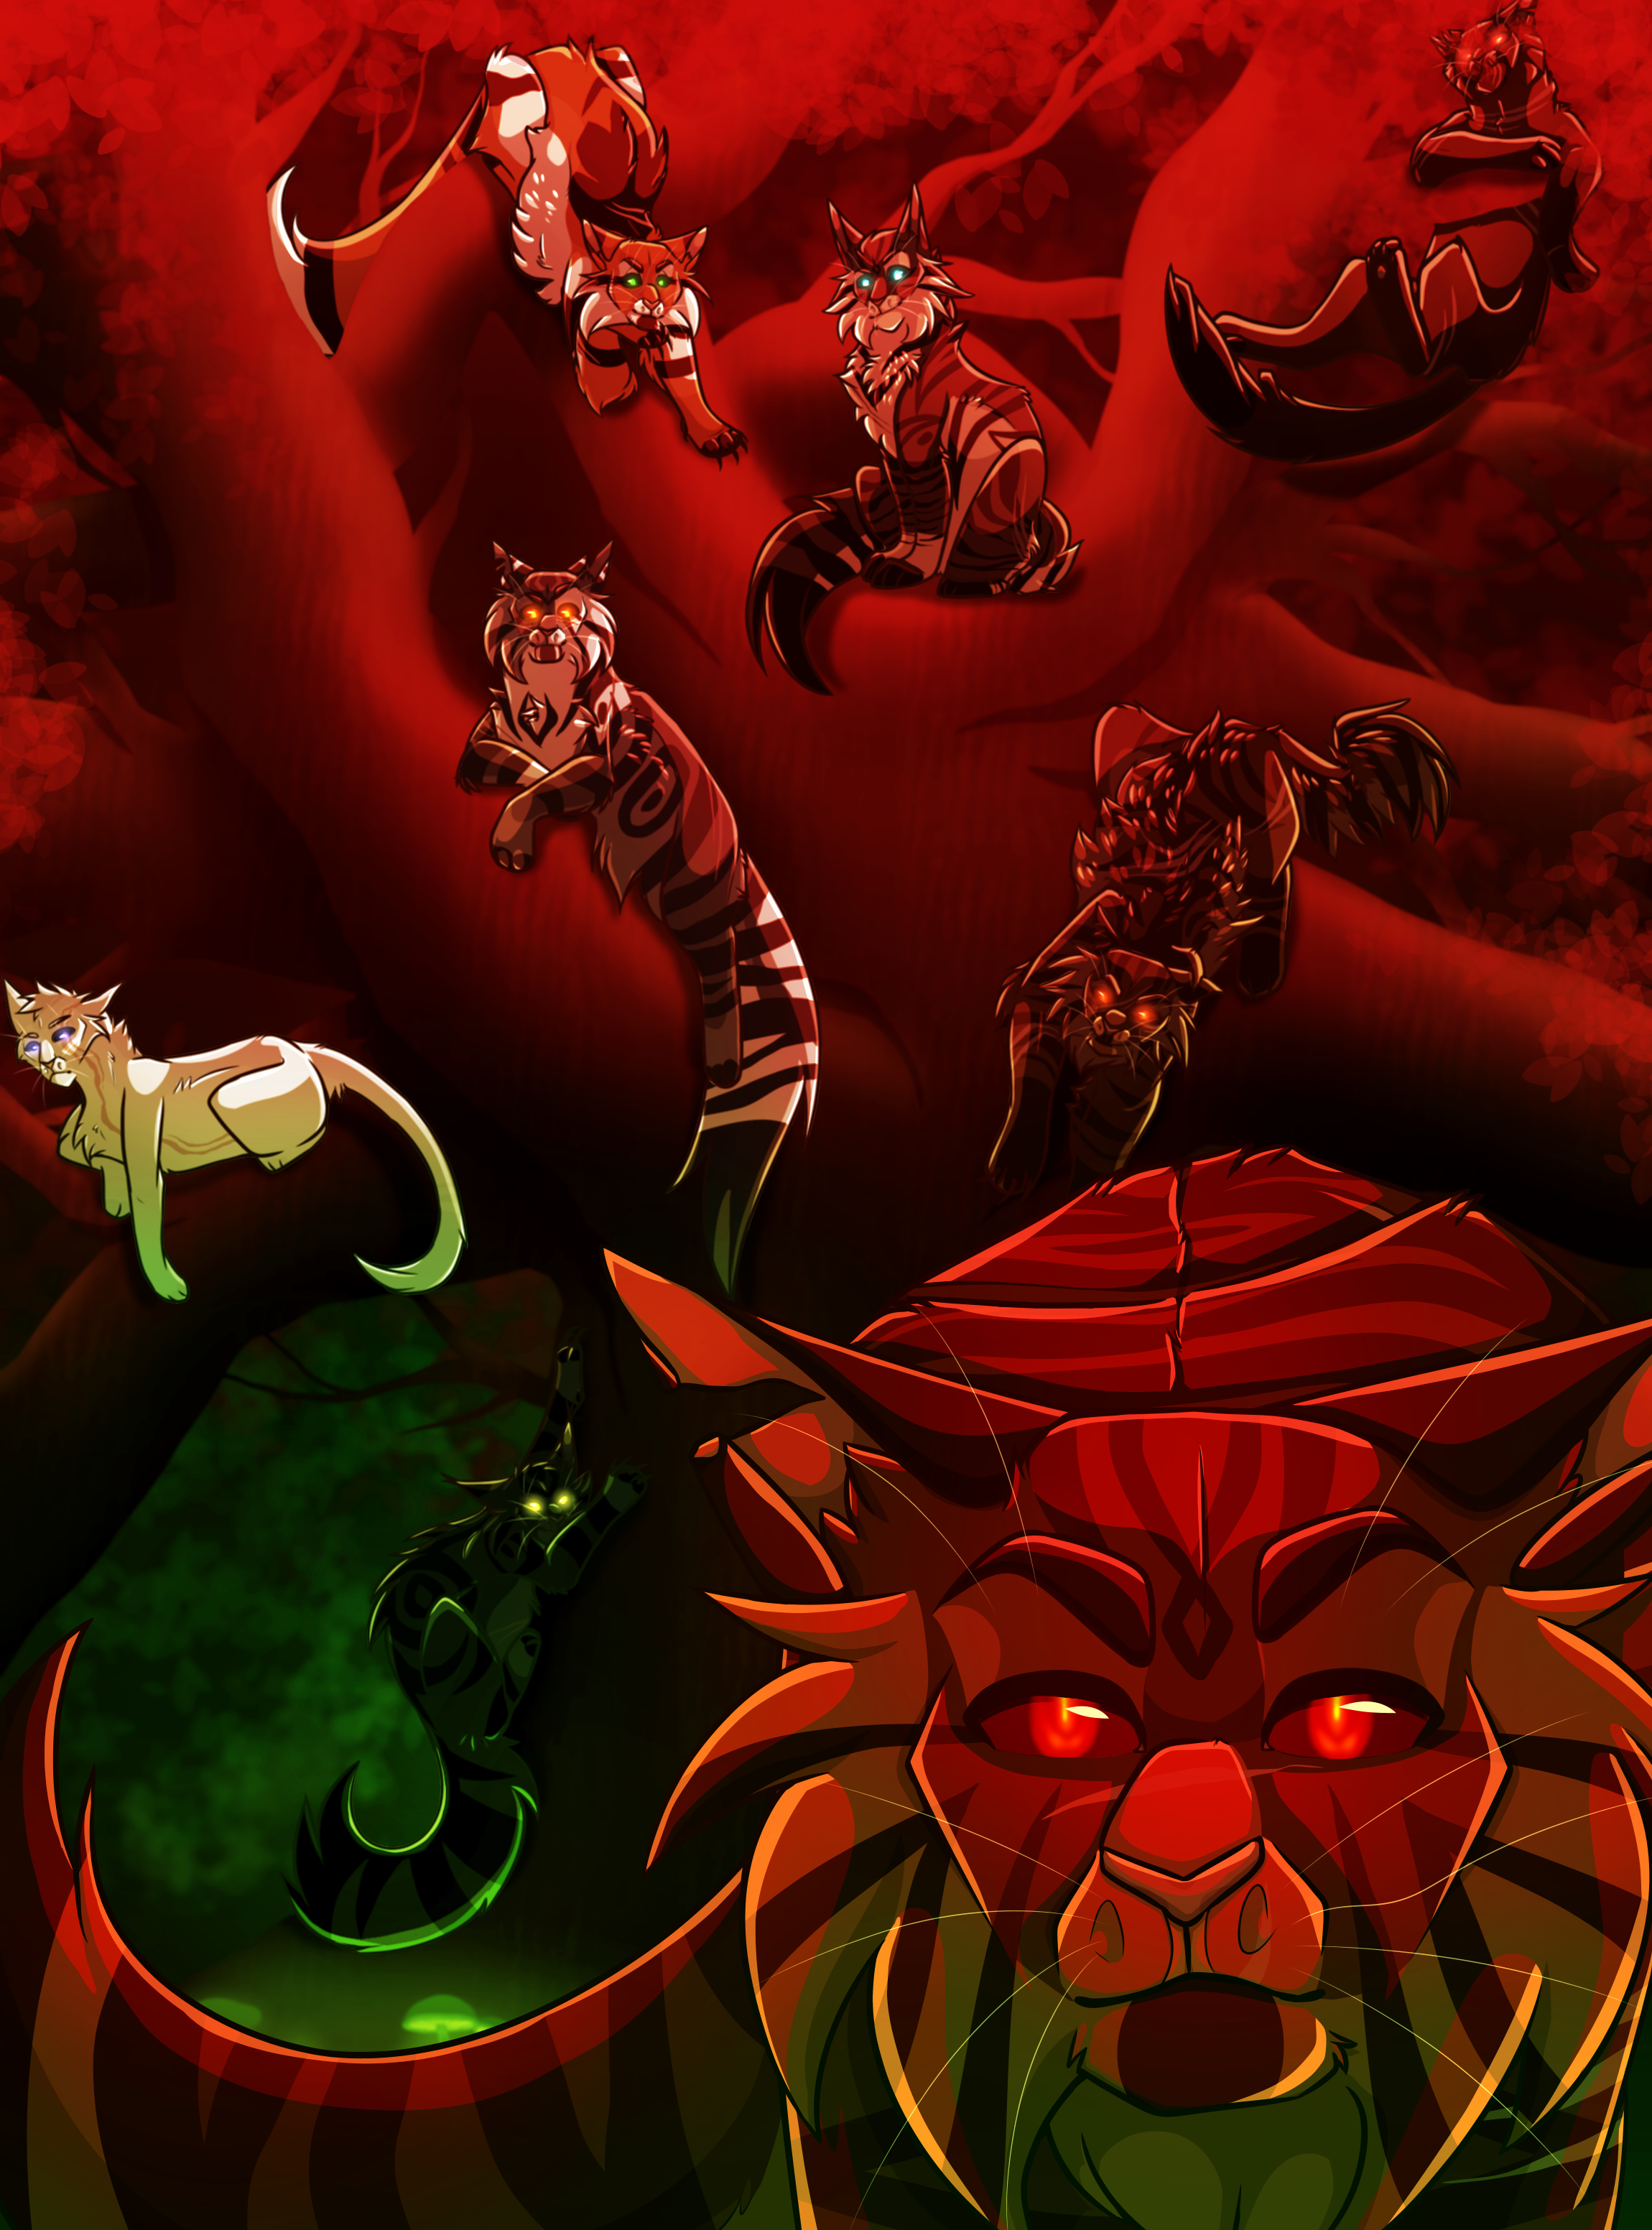 The Villains of the Dark Forest by DrakynWyrm on DeviantArt